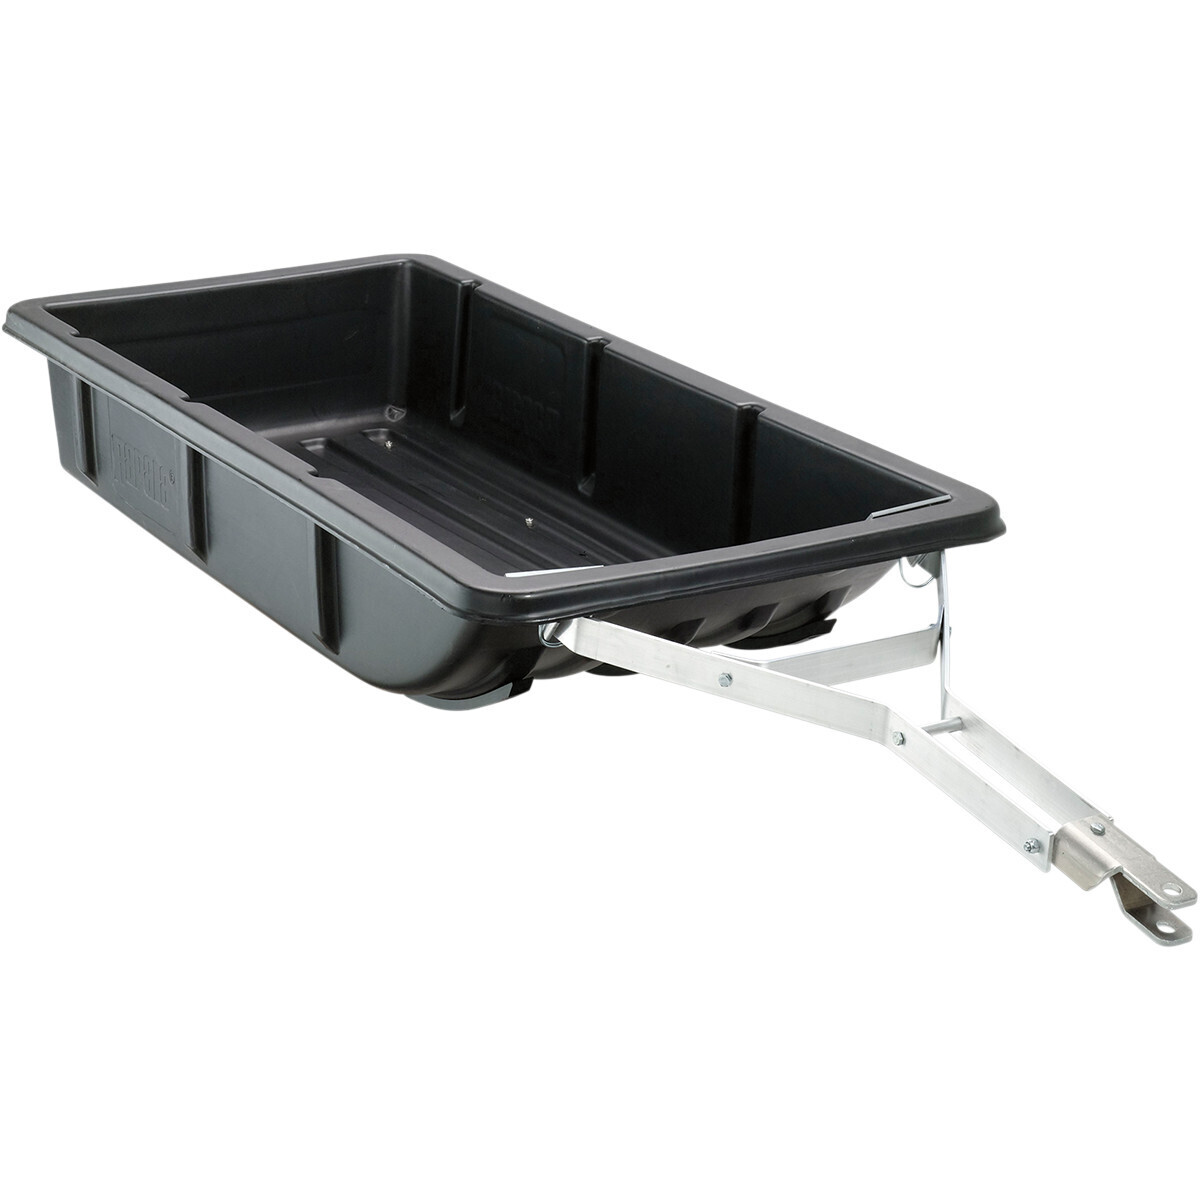 MOOSE UTILITY DIVISION
TOW BAR REPLACEMENT FOR SNOWMOBILE CARGO TUB